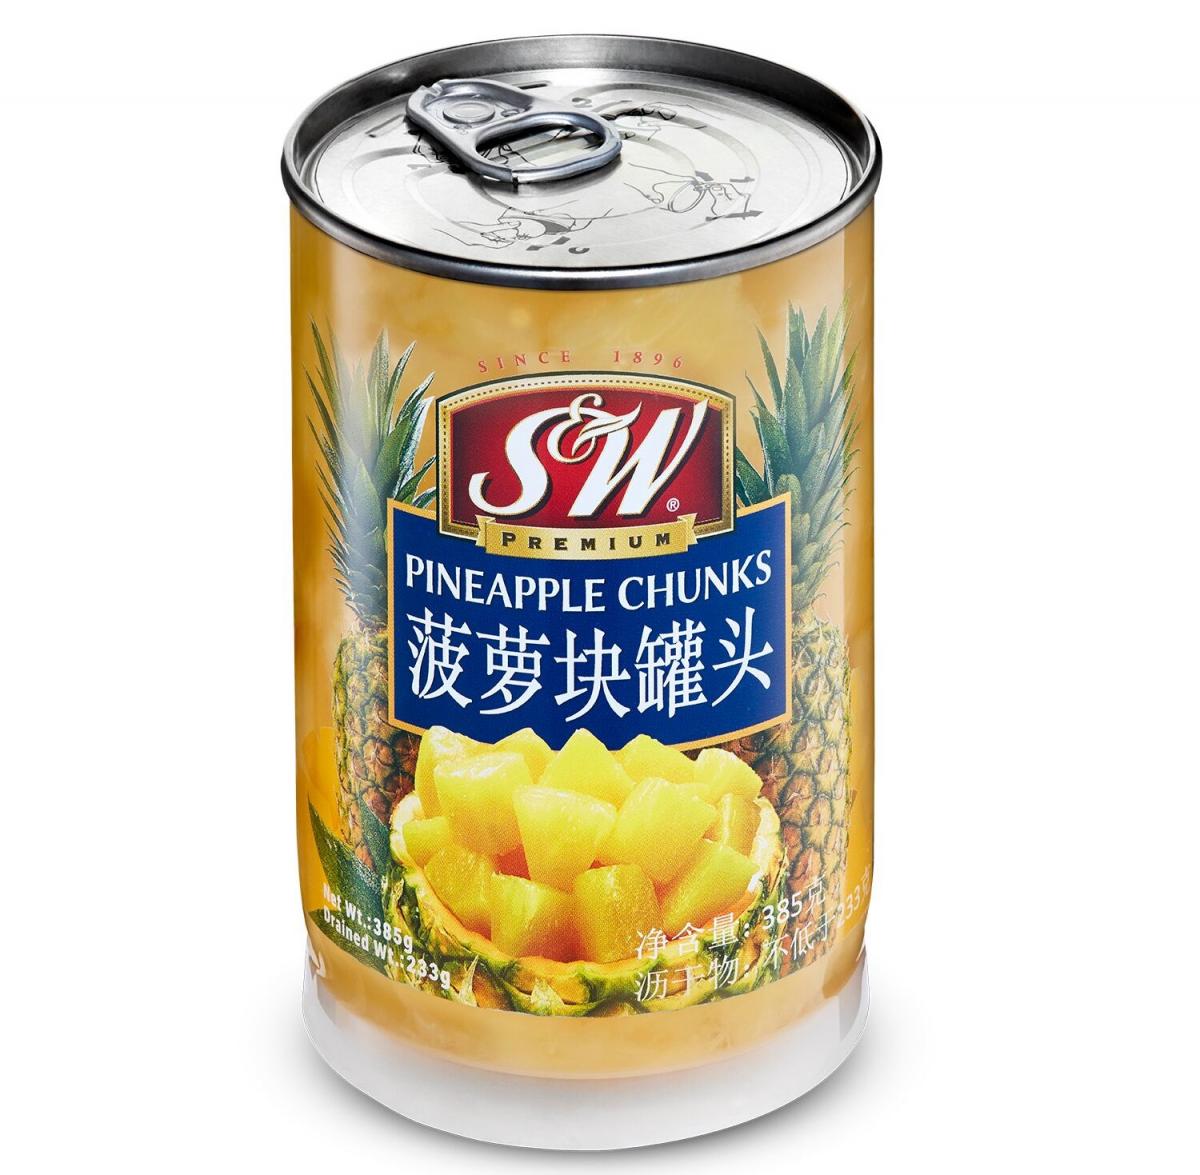 S&W uses Klear can packaging for fresh fruit products sold in China and Korea